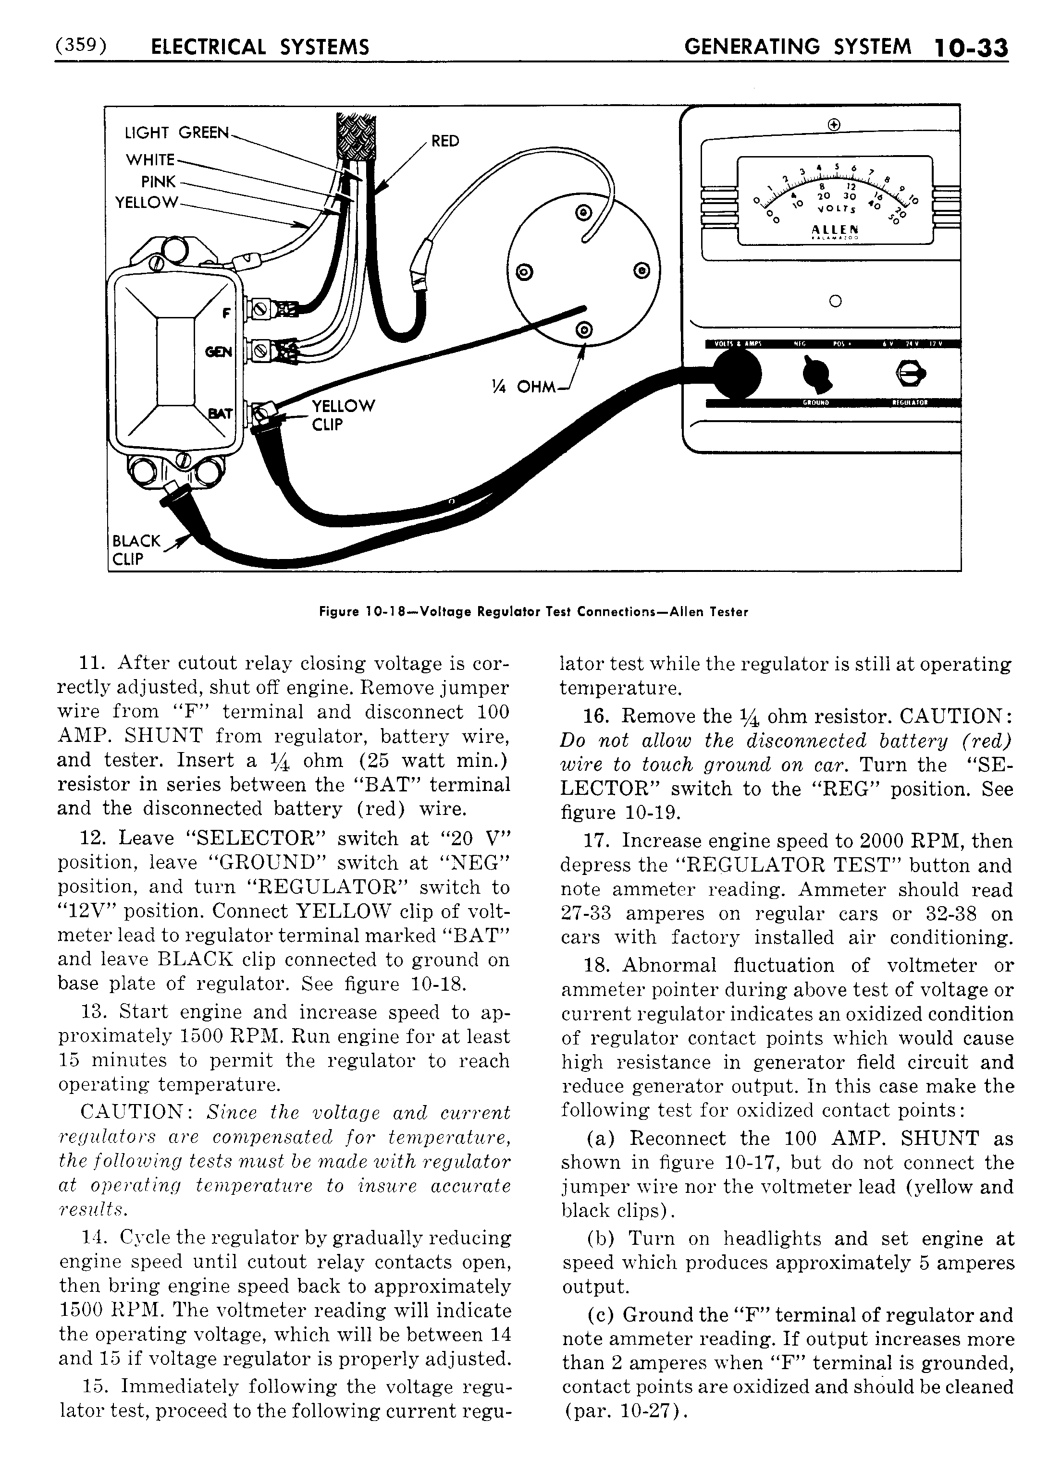 n_11 1956 Buick Shop Manual - Electrical Systems-033-033.jpg